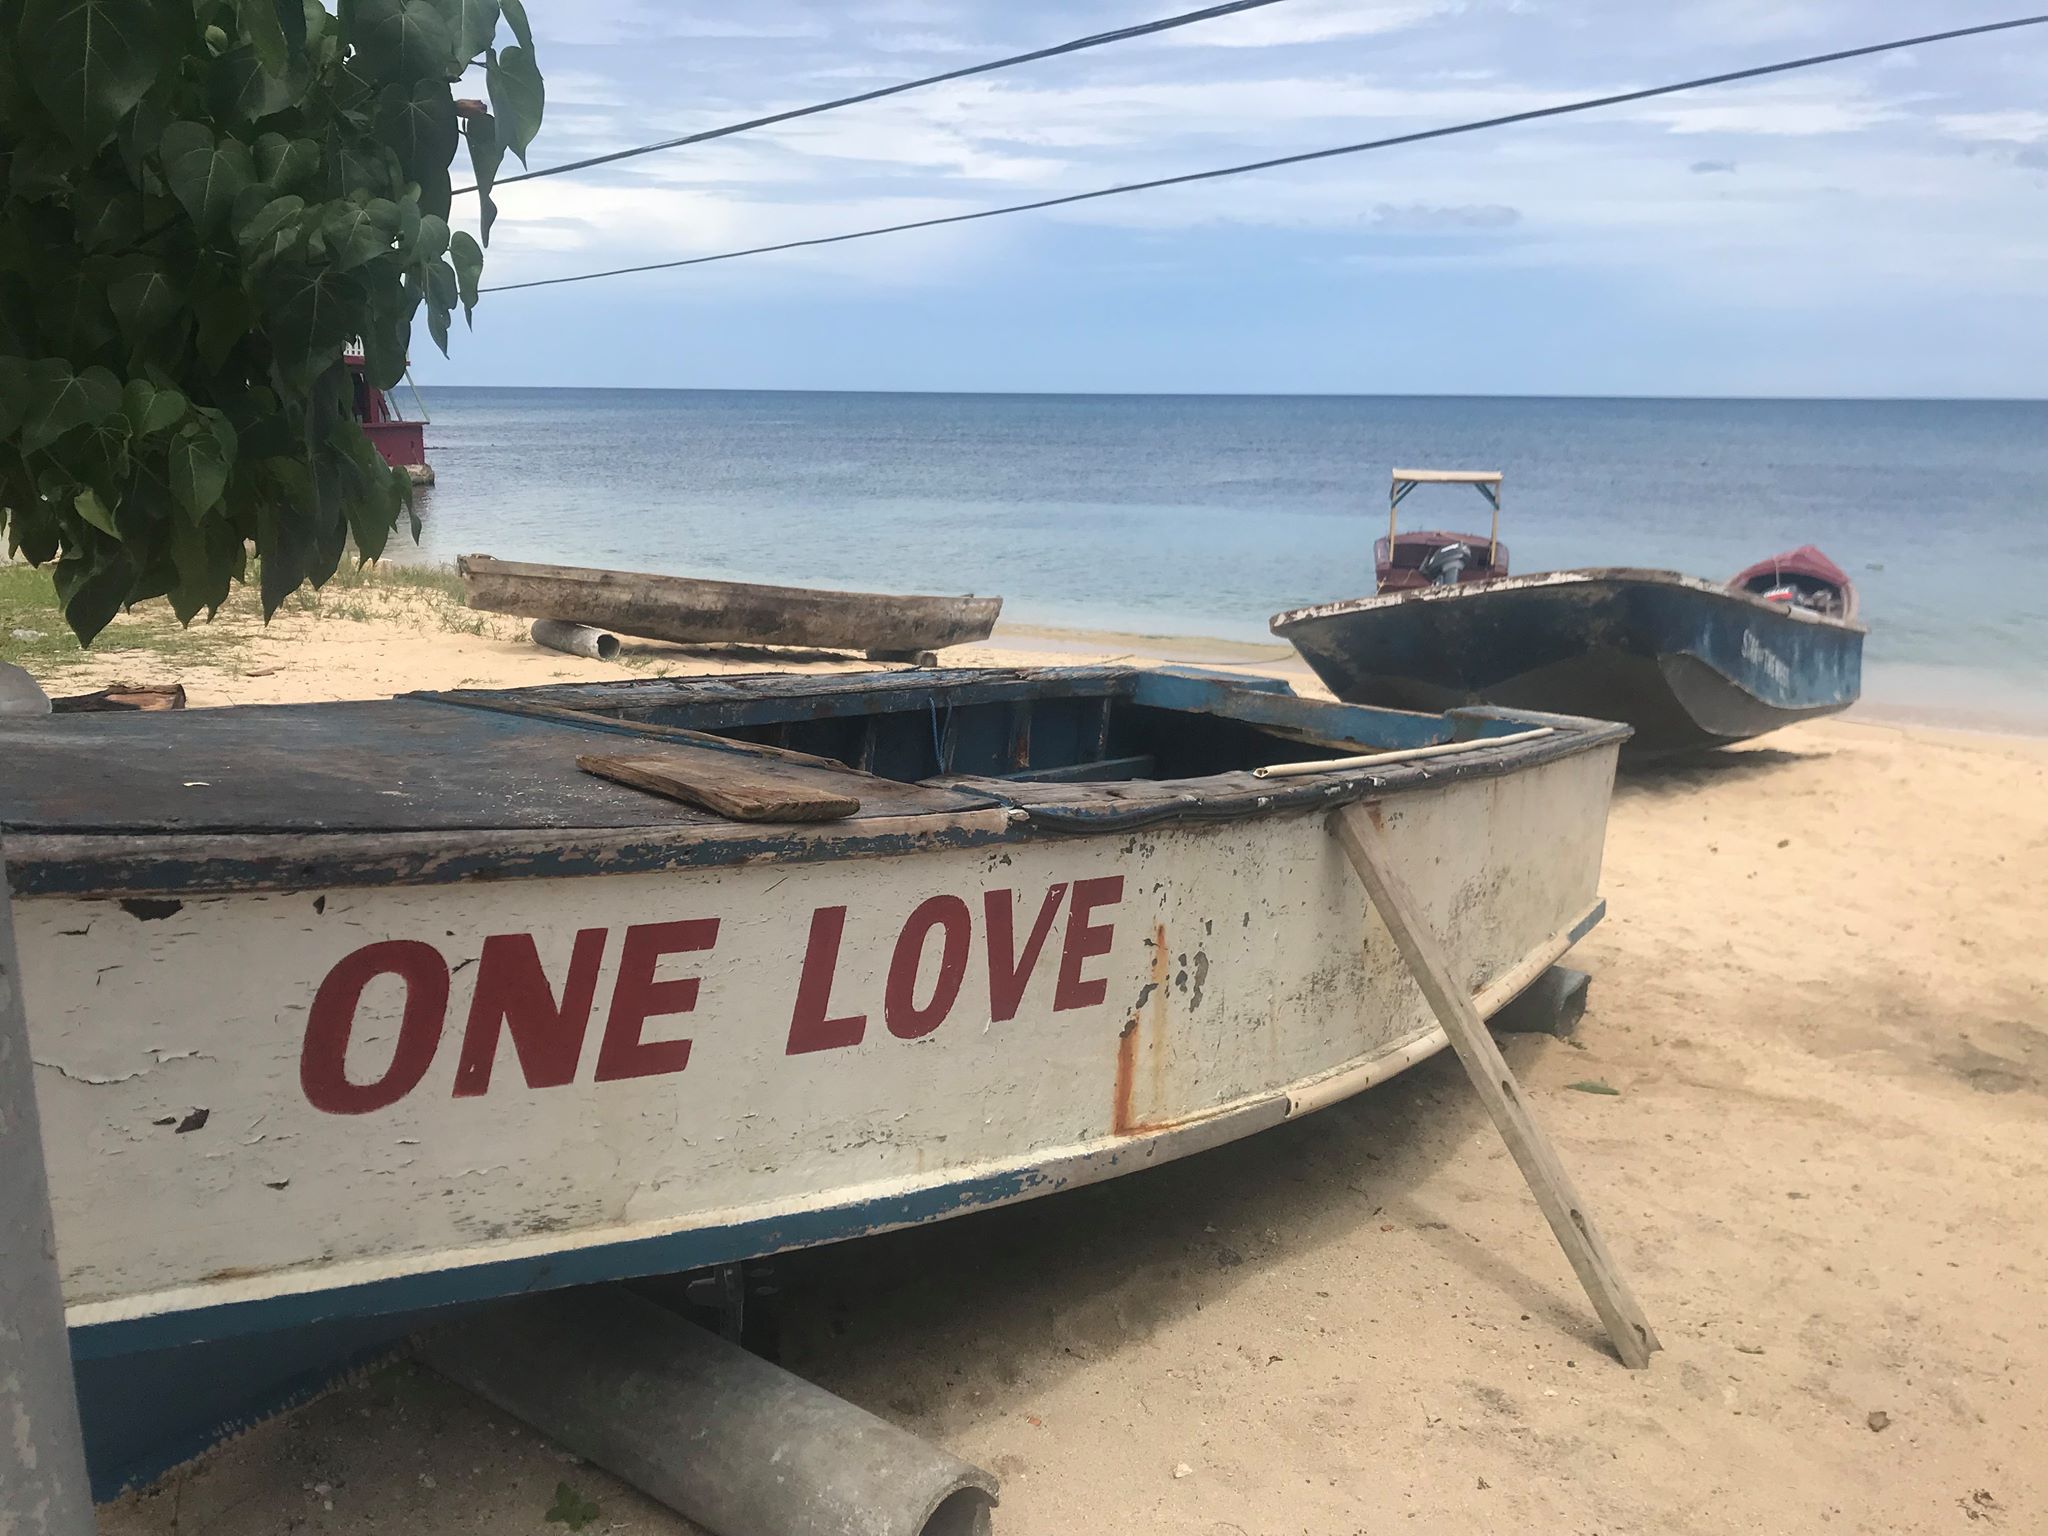 Old wooden boats rest on the sandy beach outside Judy's House in Negril, Jamaica. The boat in the foreground is painted with chopped white and blue paint, and says "one love" in red letters on the side.